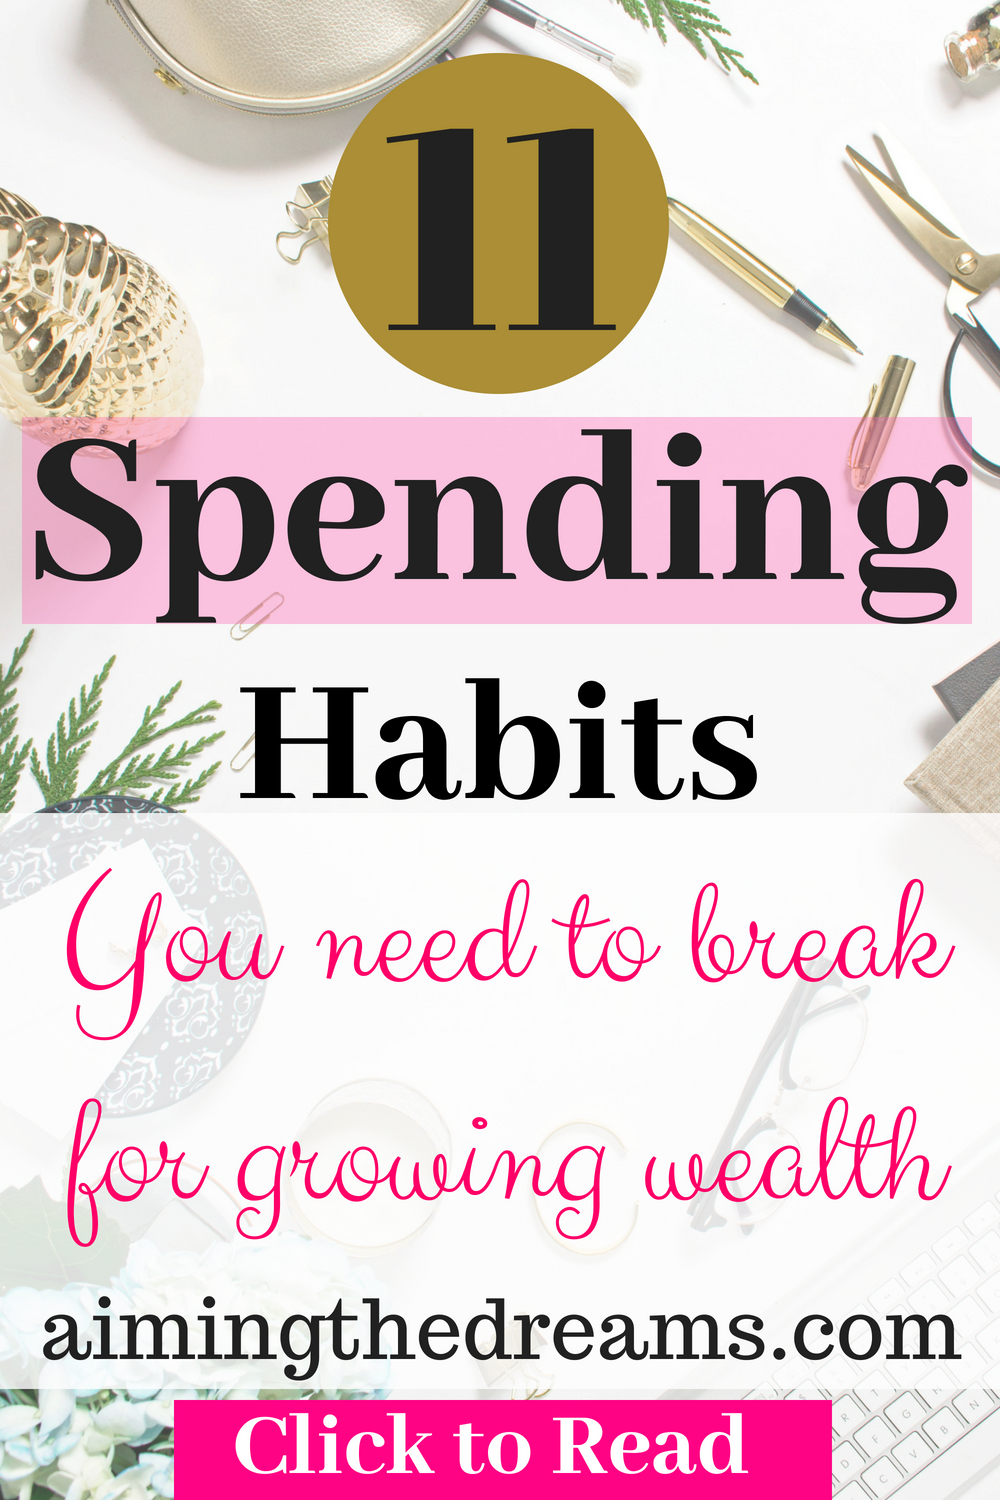 Track spending habits and break the bad ones , replace them with new better saving habis. This will definitely help you in achieving your financial goals.